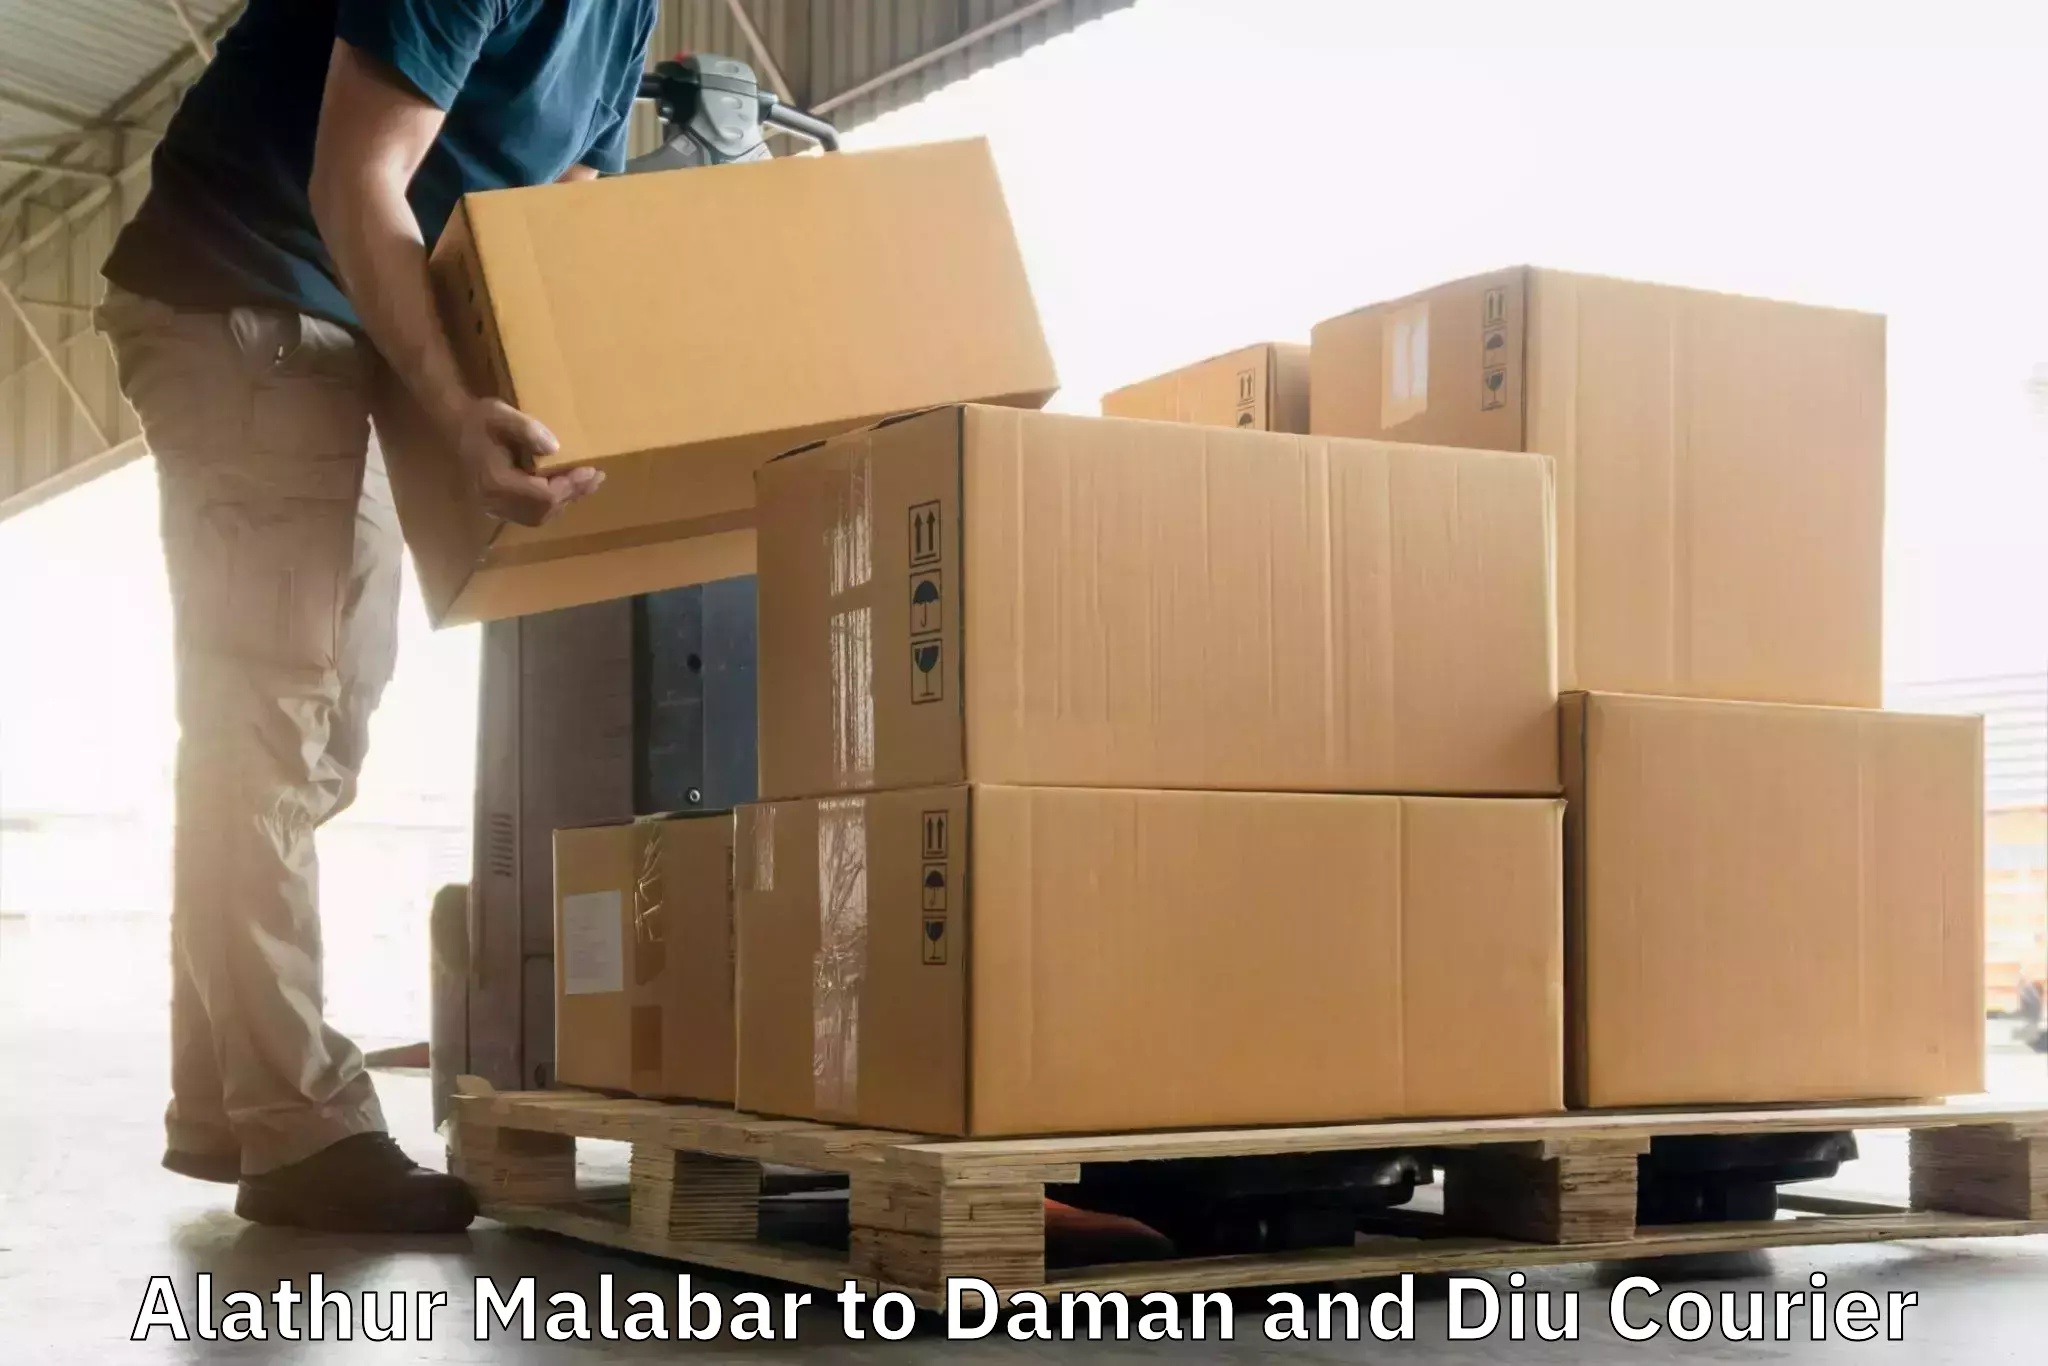 Nationwide delivery network Alathur Malabar to Daman and Diu